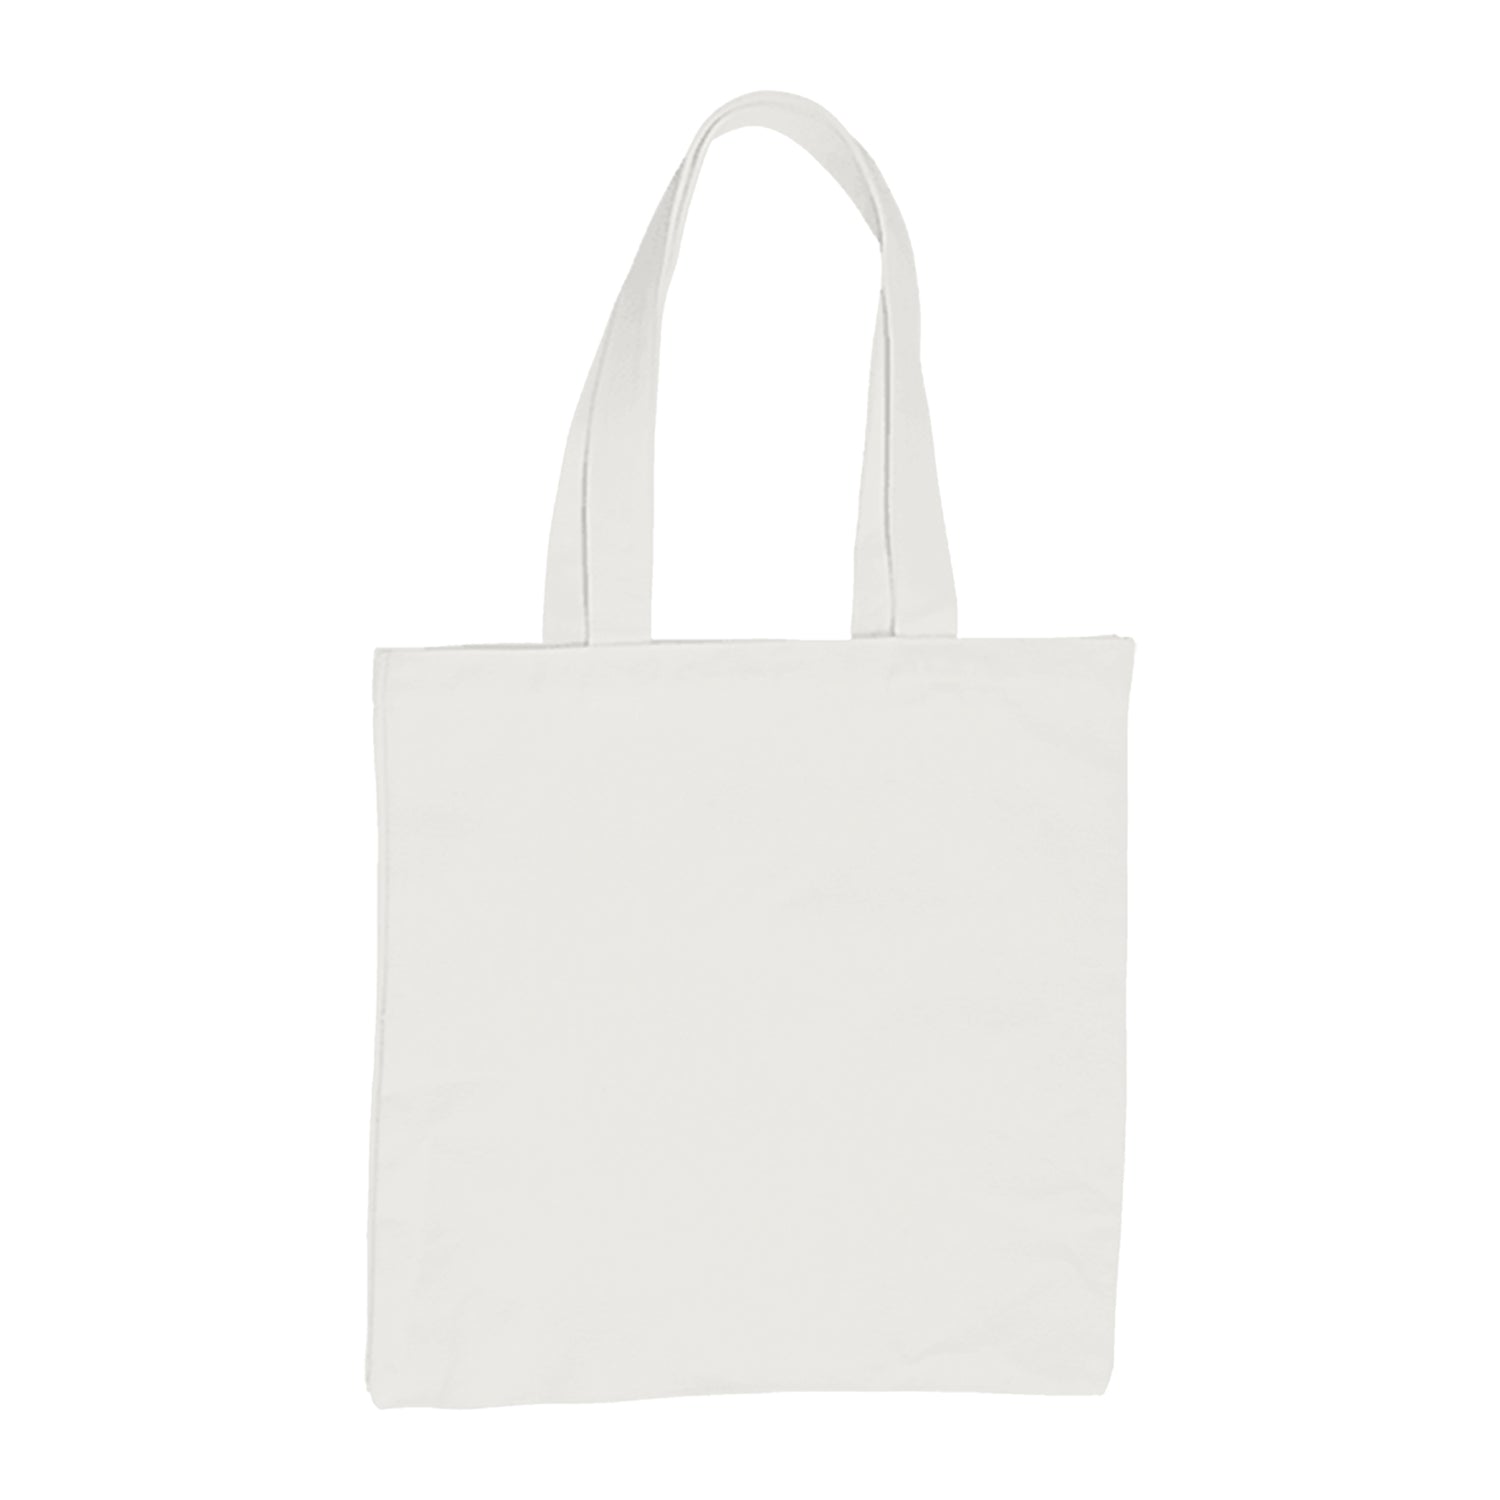 Back of White Tote